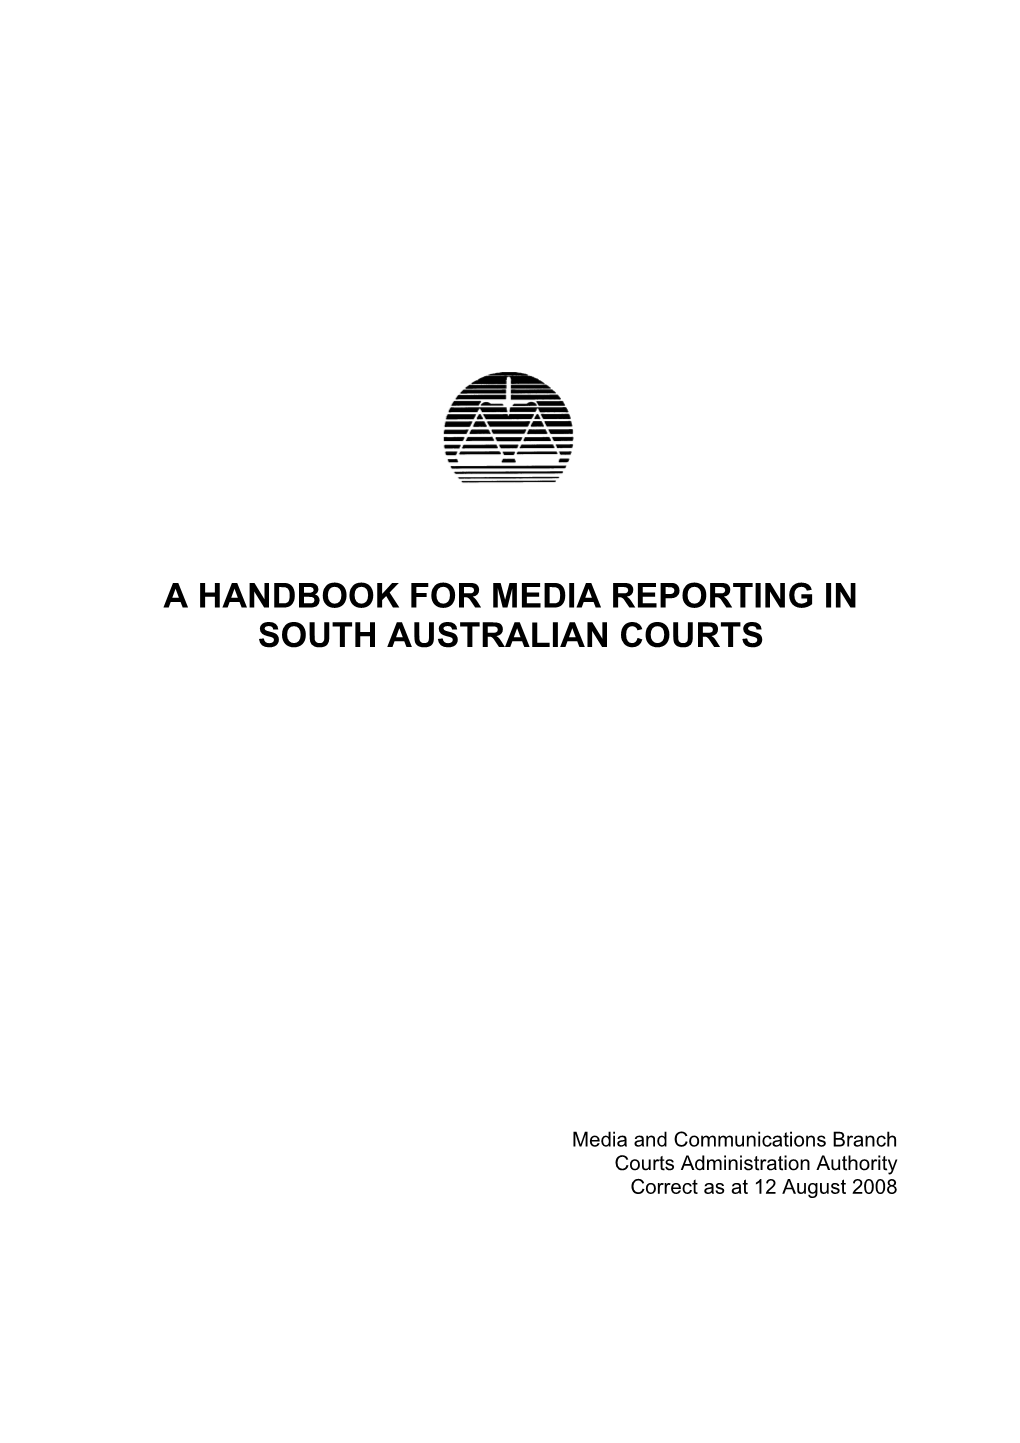 A Handbook for Media Reporting in South Australian Courts